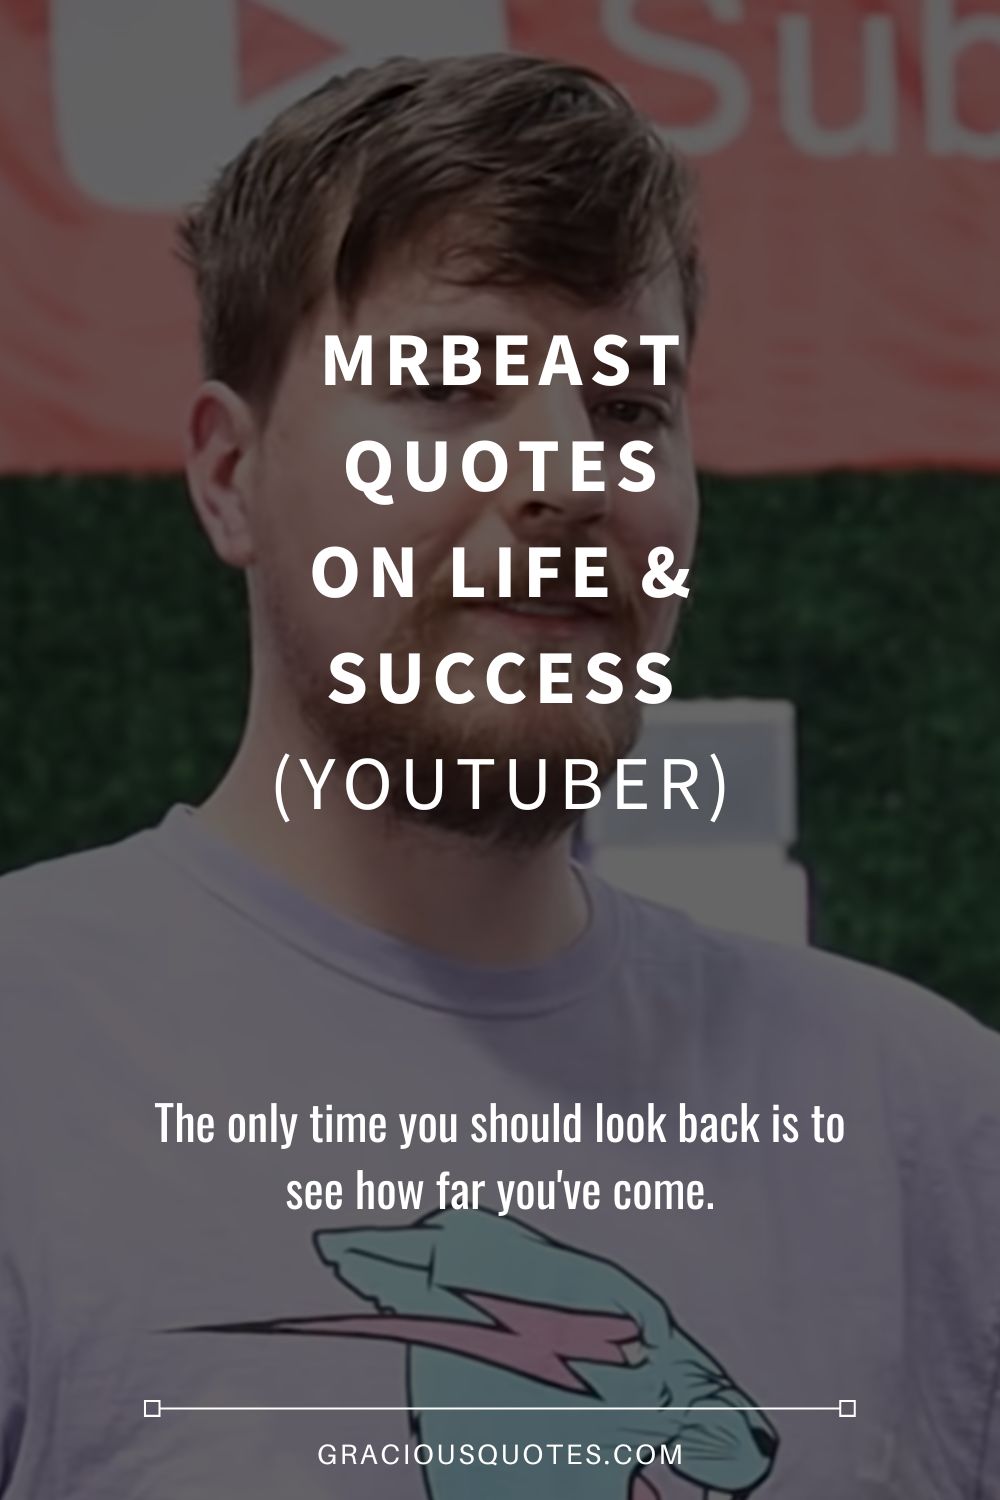 MrBeast Quotes on Life & Success (YOUTUBER) - Gracious Quotes